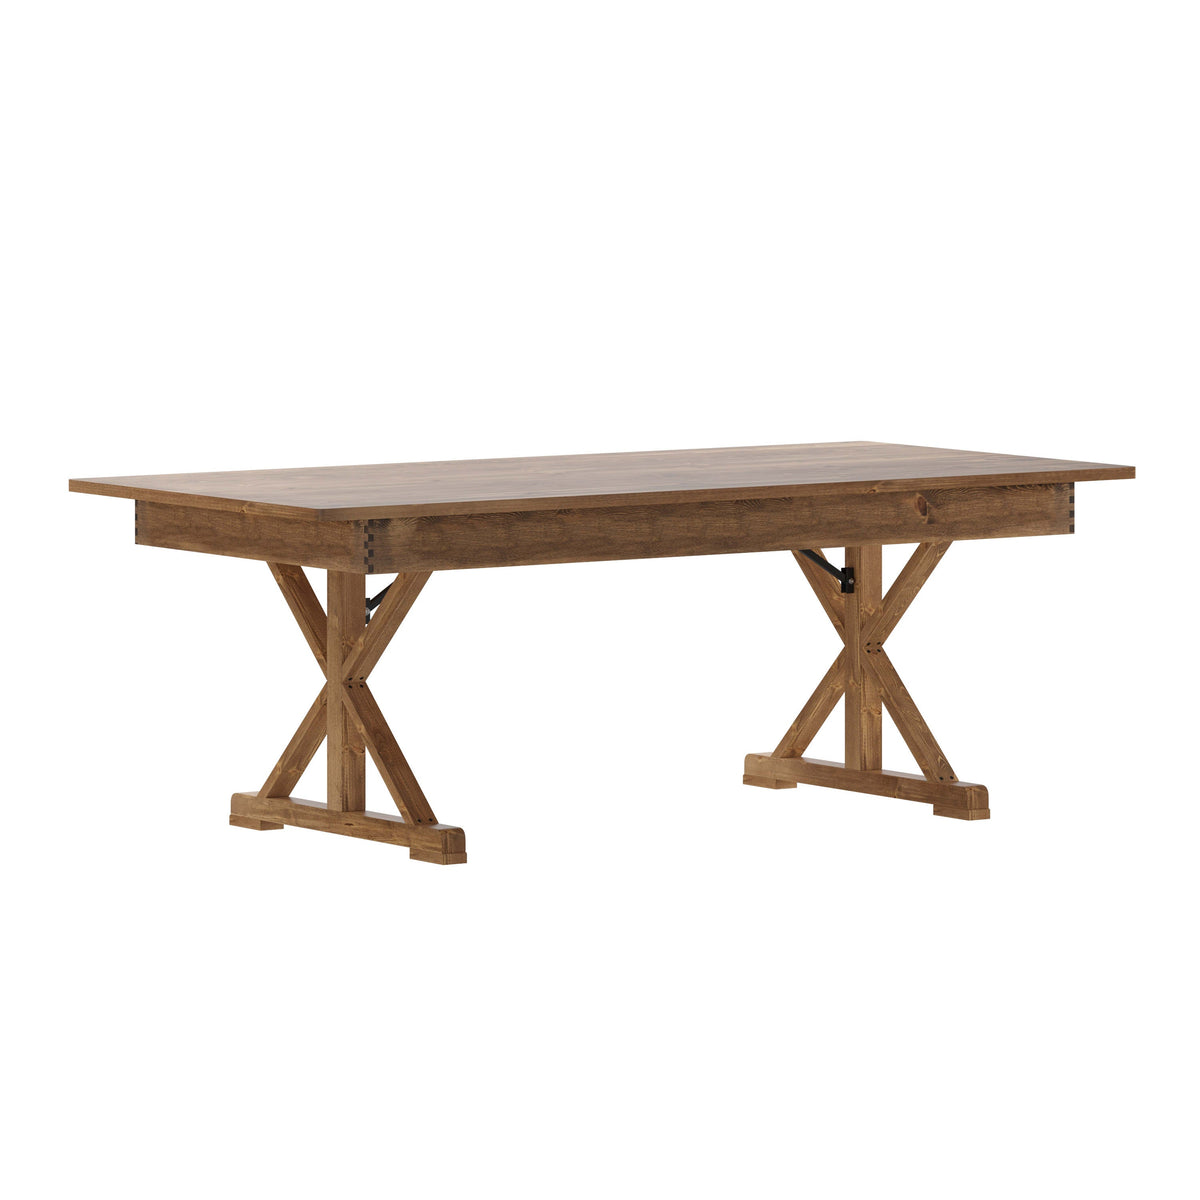 Antique Rustic |#| Solid Pine Farm Dining Table with X-Style Legs in Antique Rustic - 7' x 40inch